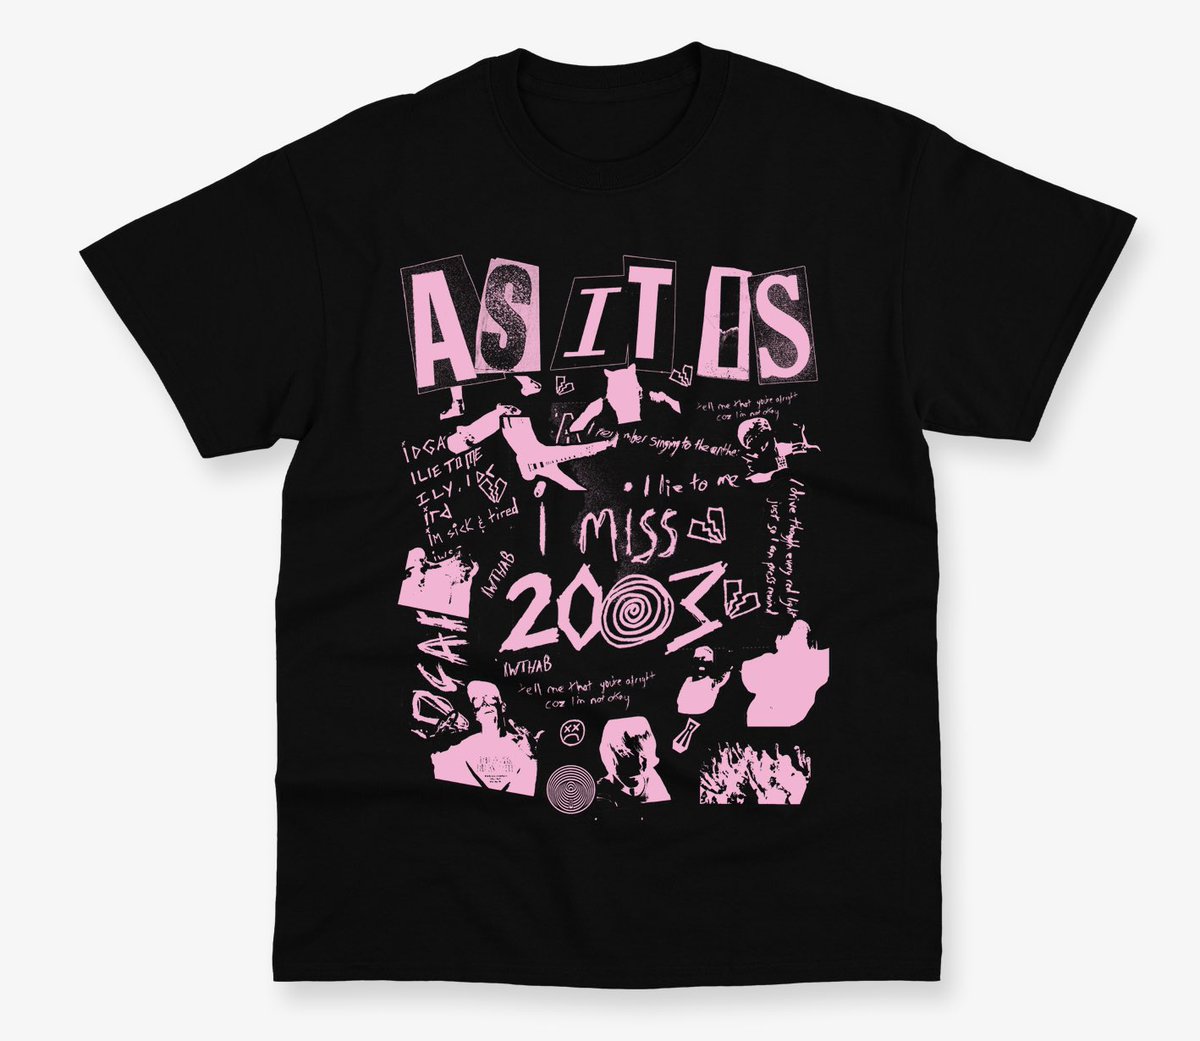 BUT WHAT ABOUT A BLACK ‘I MISS 2003’ TEE? IS THAT SOMETHING Y’ALL NEED? 🖤